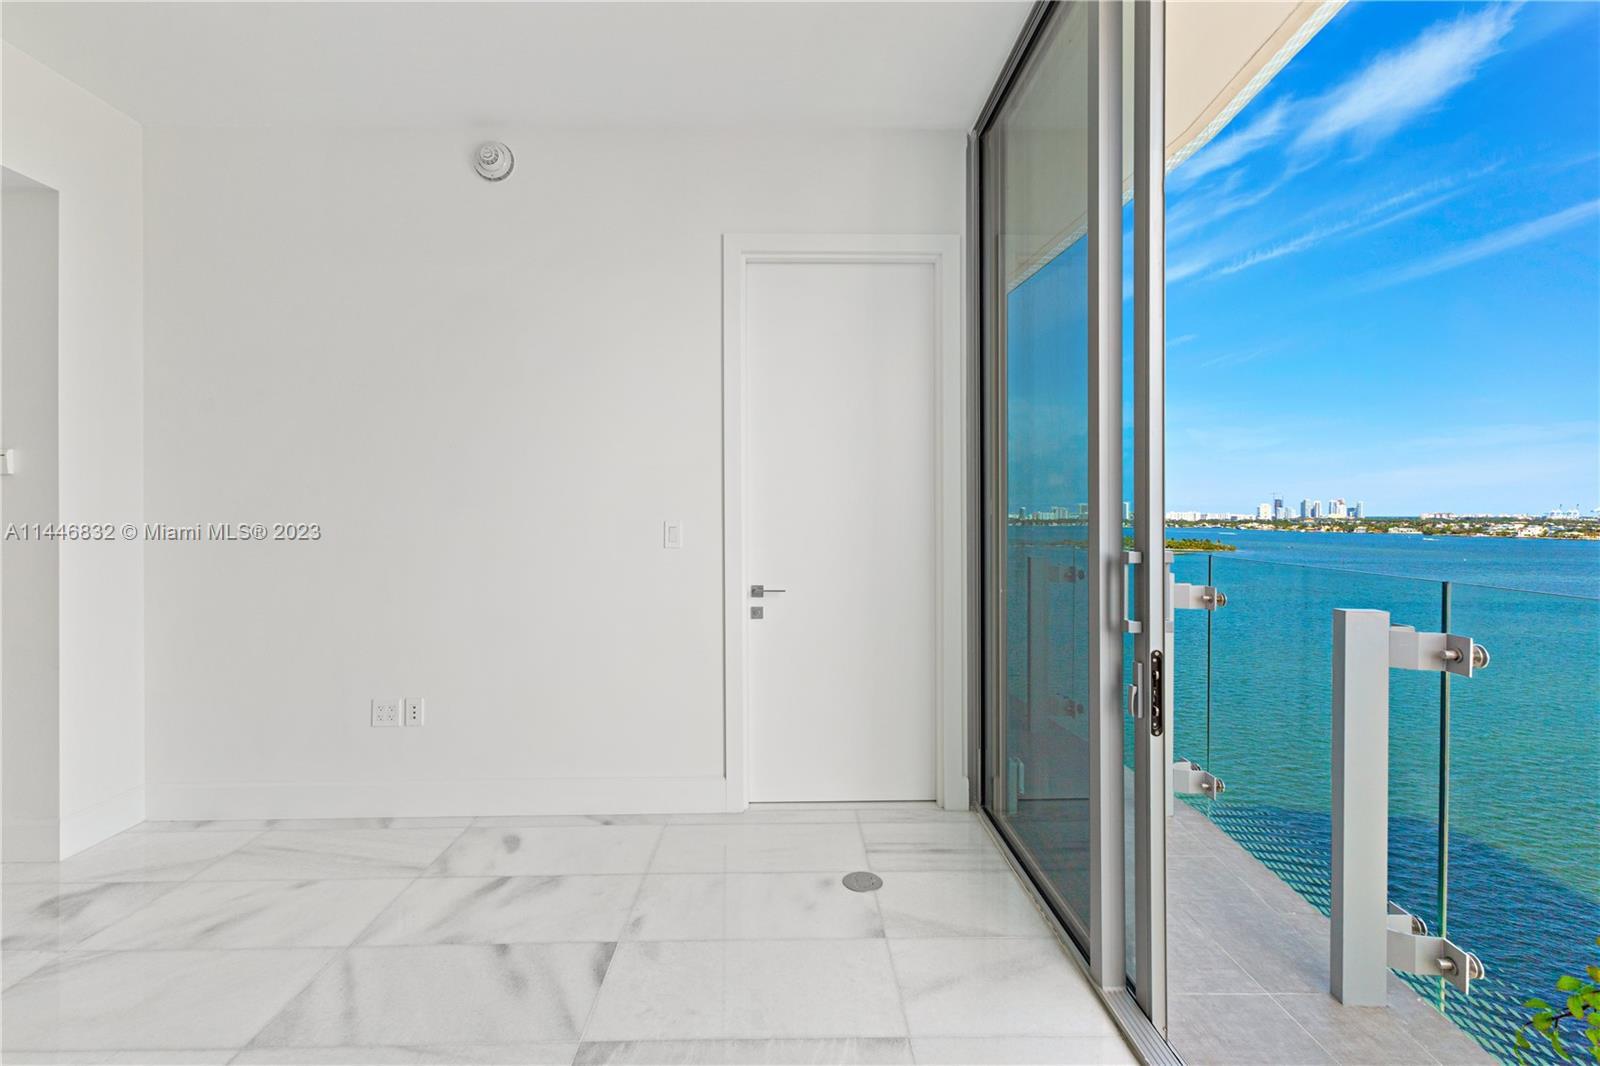 Experience ultimate waterfront designer luxury living at Missoni Baia, Miami's newest hottest reside